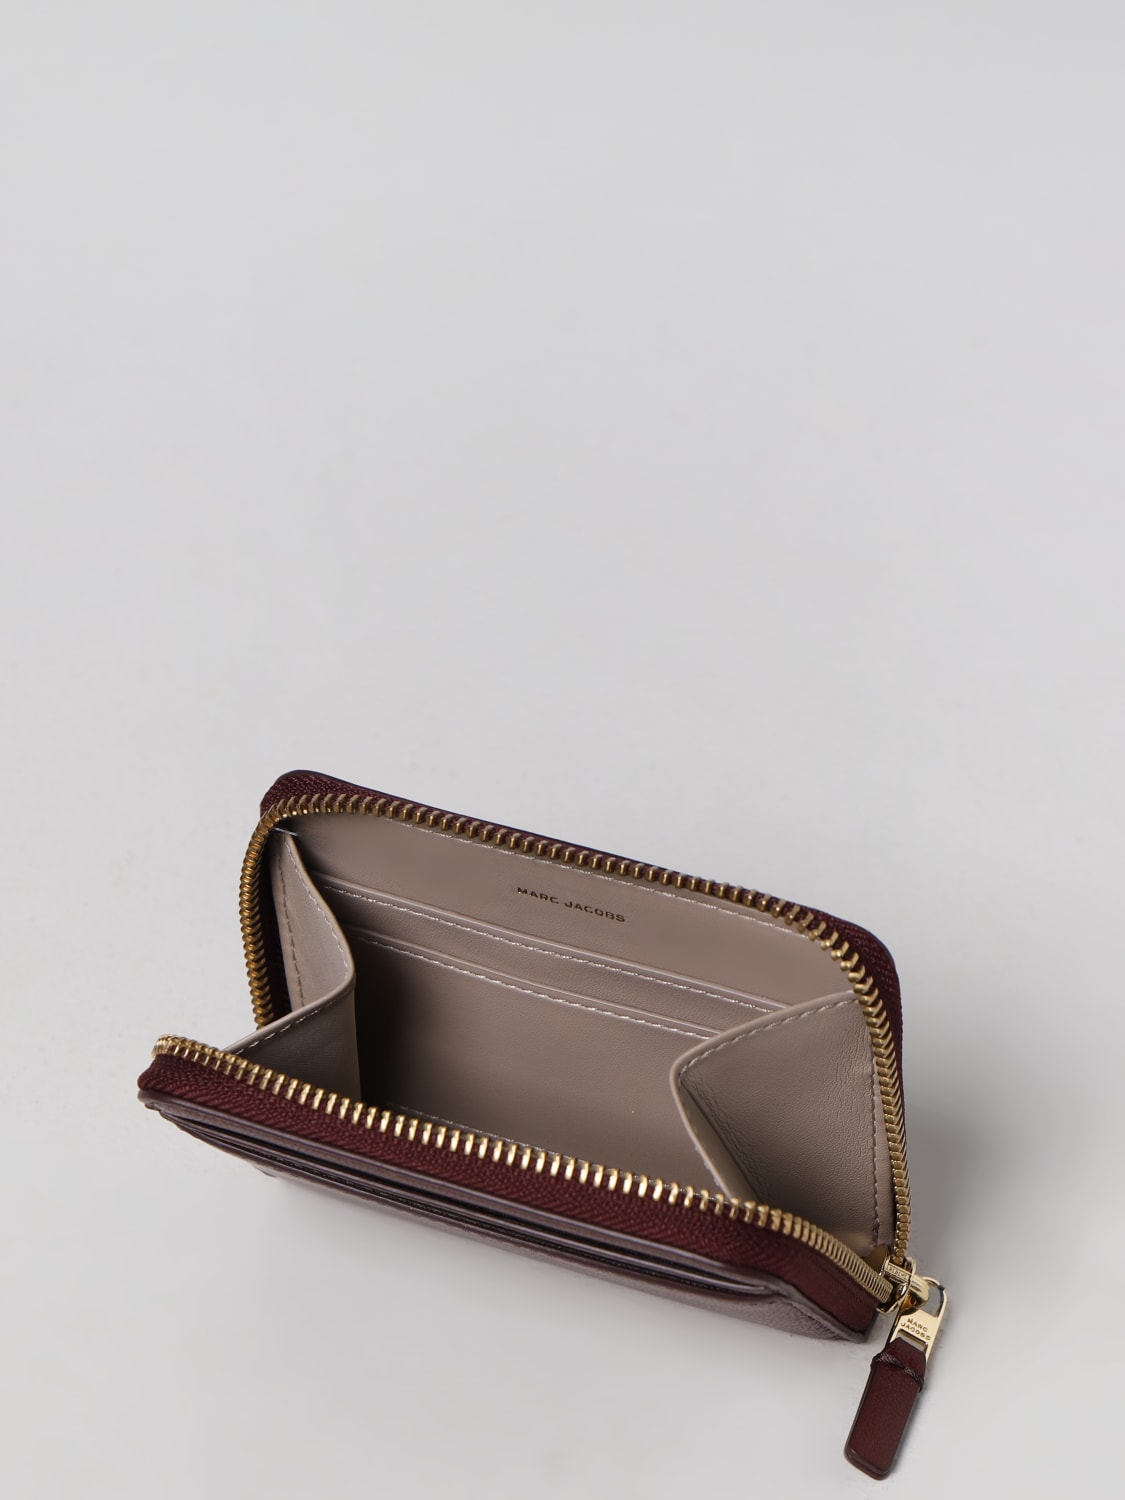 Marc Jacobs Women's Leather Wallet